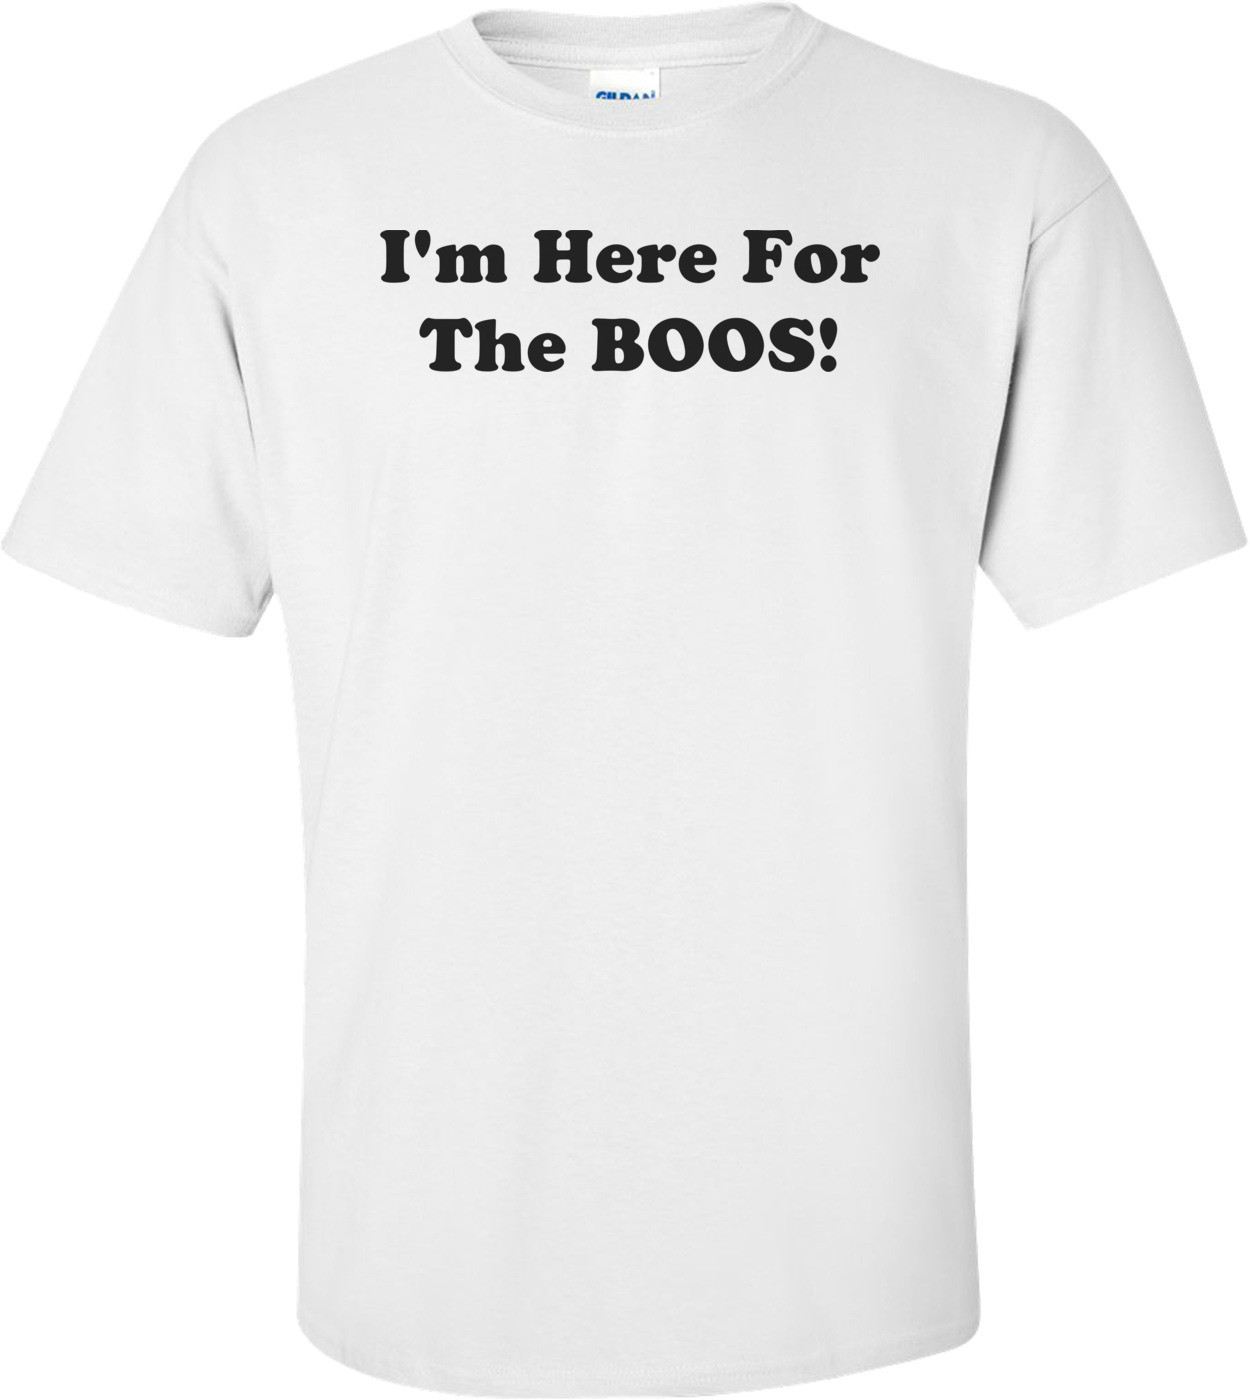 I'm Here For The BOOS!